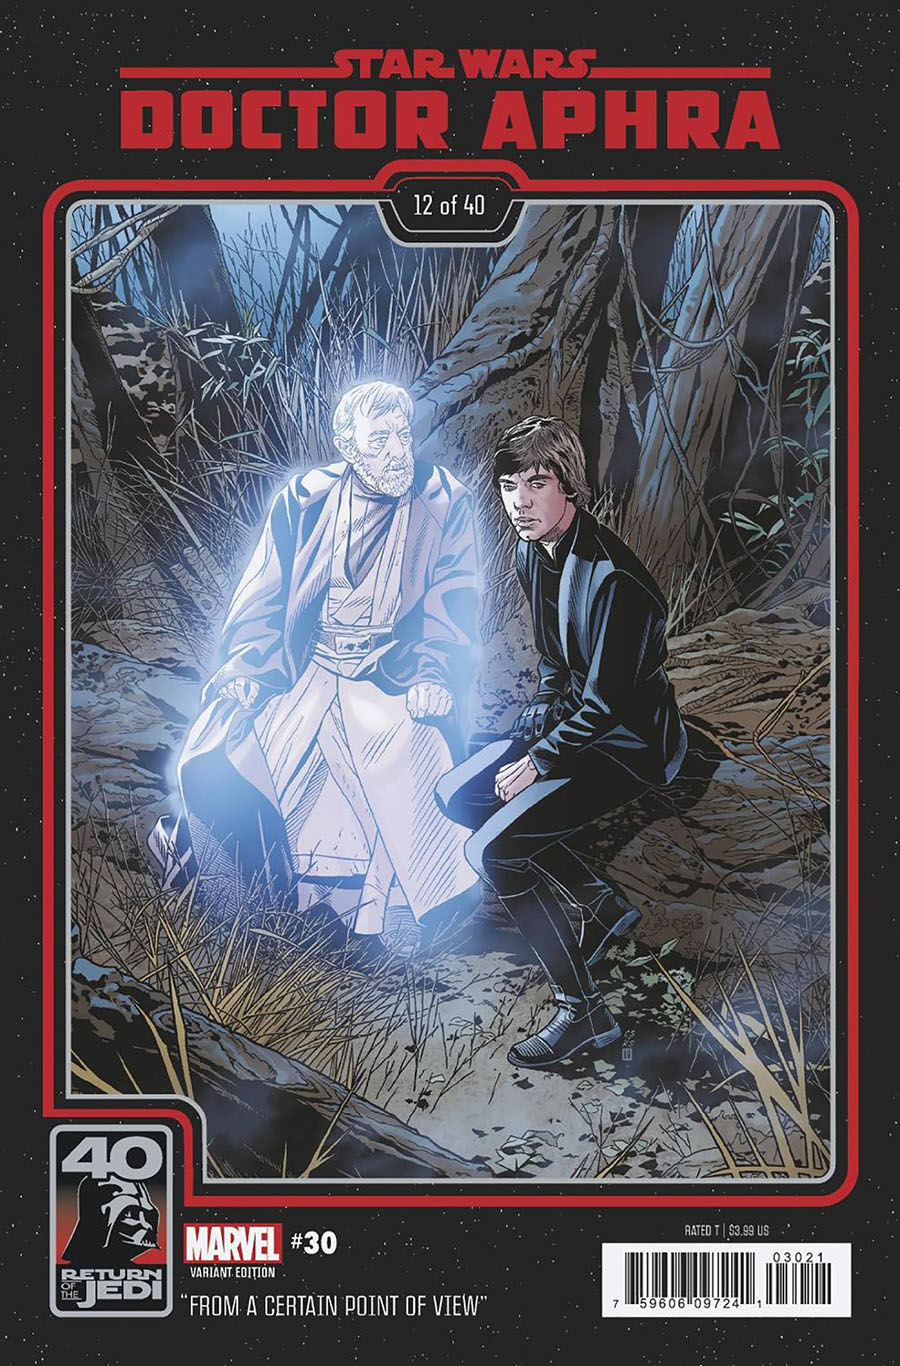 Star Wars Doctor Aphra Vol 2 #30 Cover B Variant Chris Sprouse Return Of The Jedi 40th Anniversary Cover